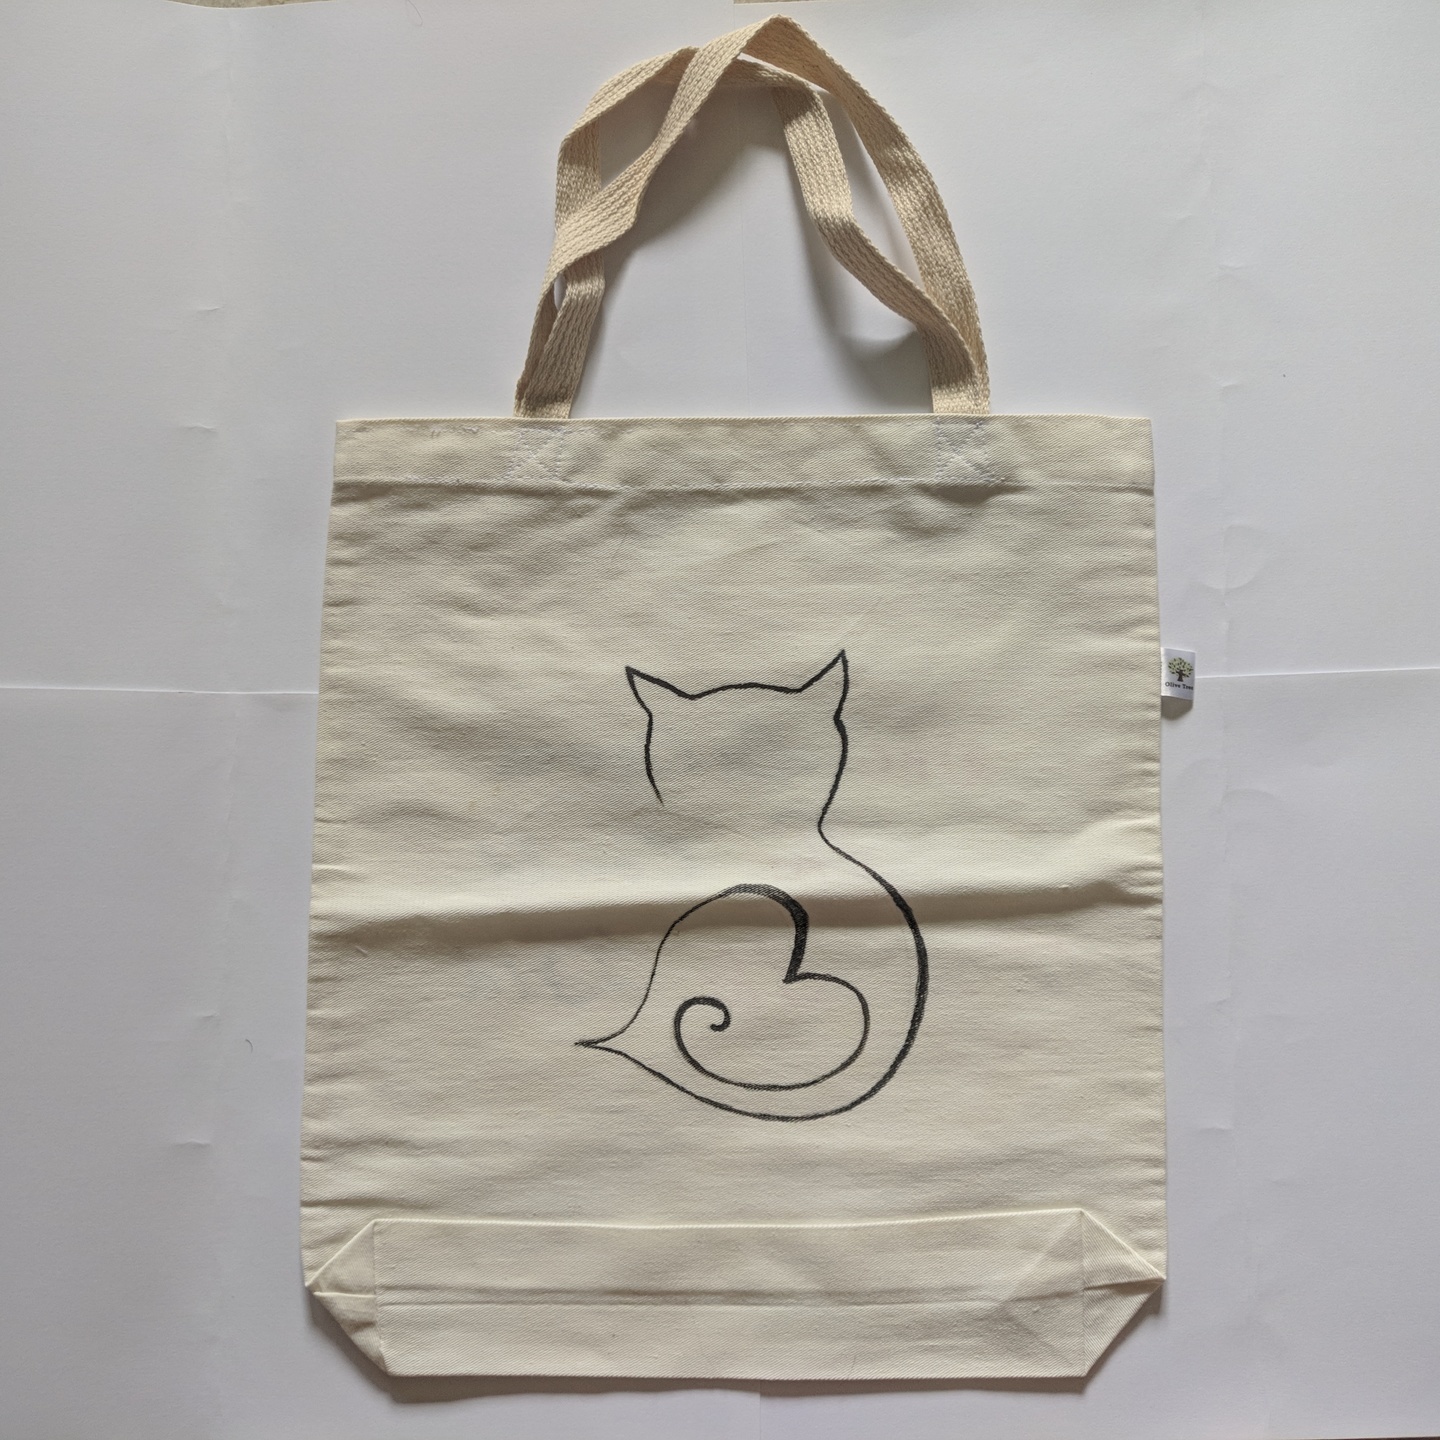 Gladiolus Totes, Lovely Cat